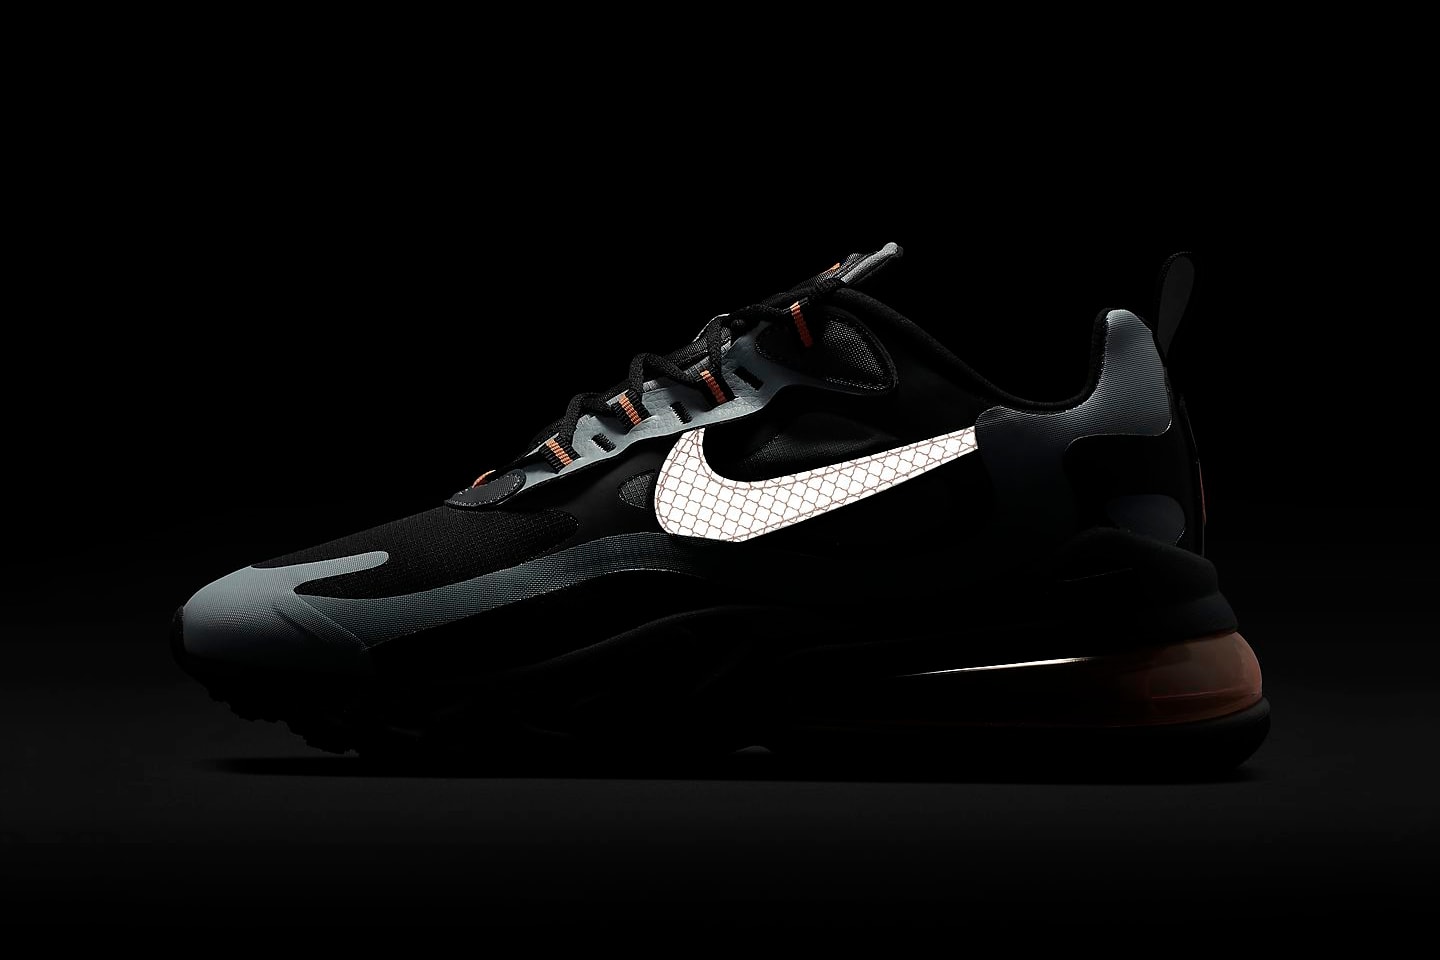 Nike Preps For Winter With The Air Max 270 Futura 'Black